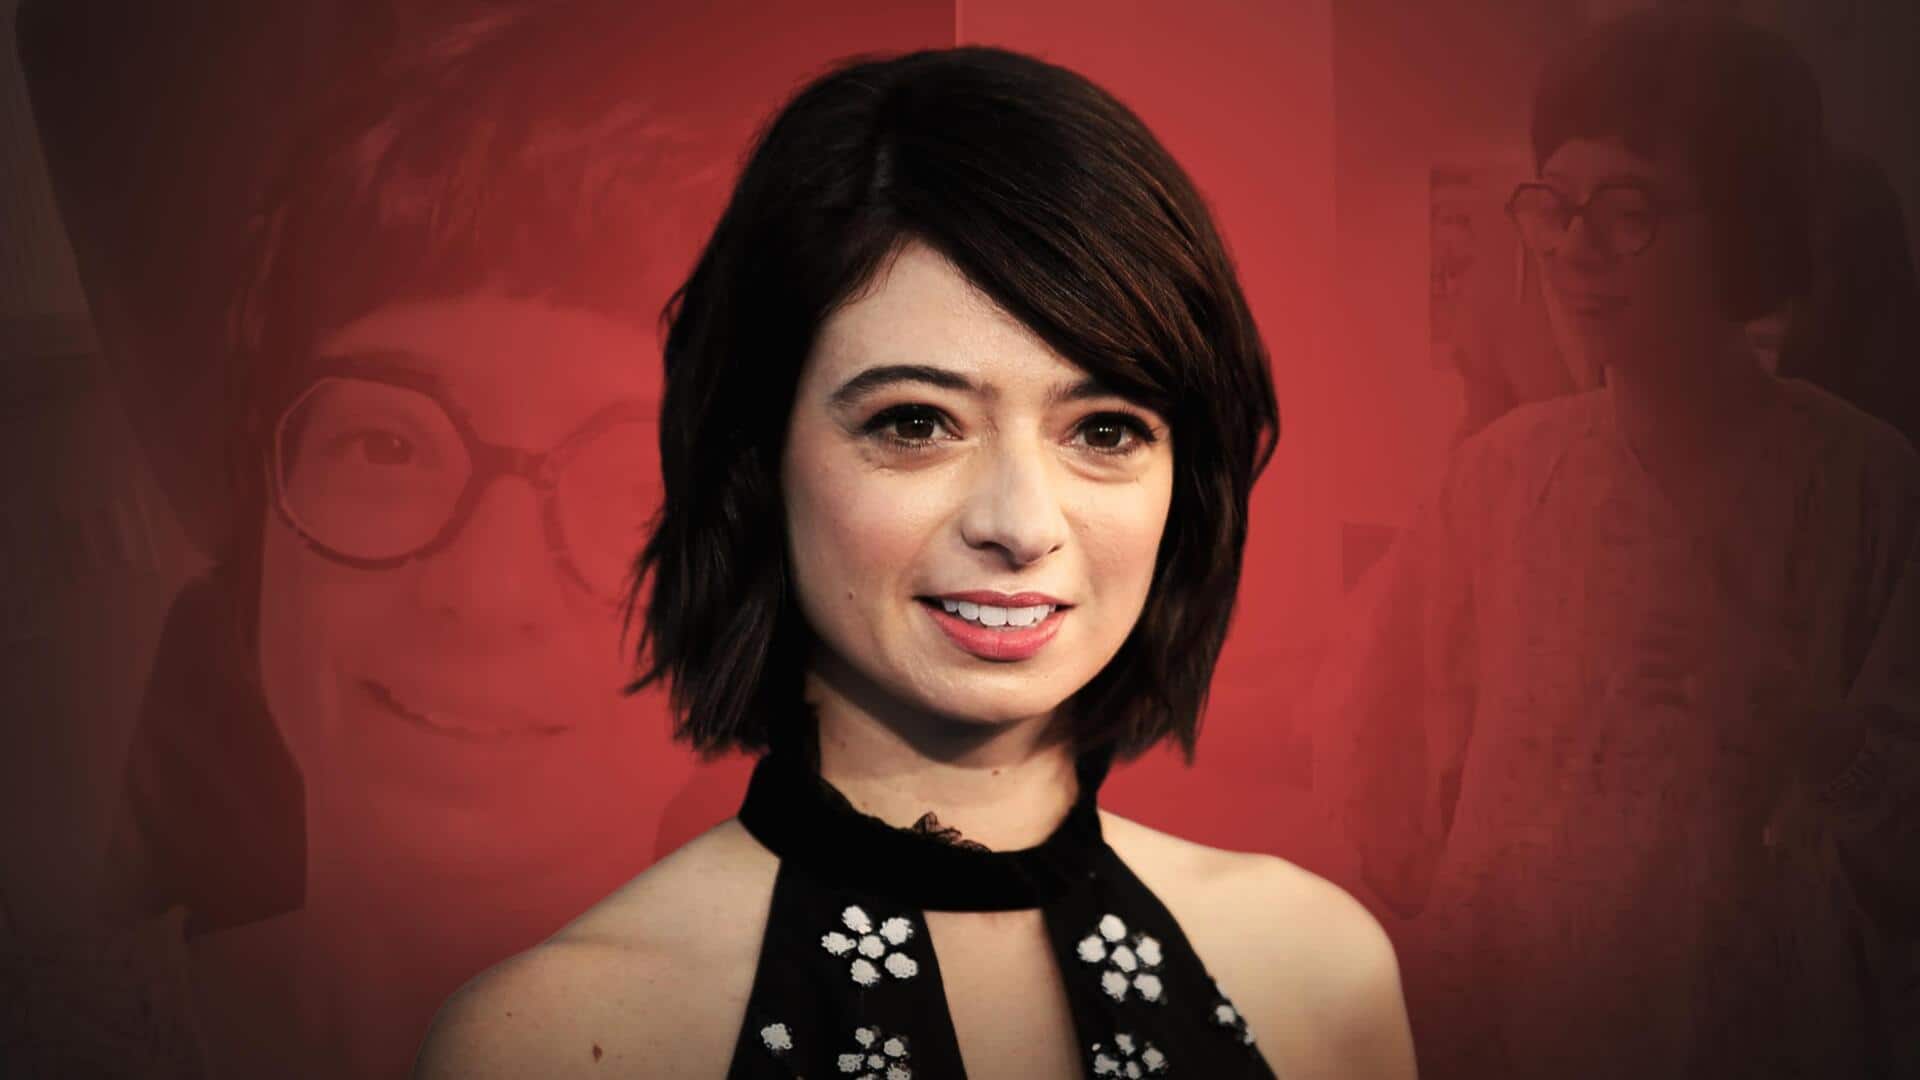 What happened to 'The Big Bang Theory' actor Kate Micucci